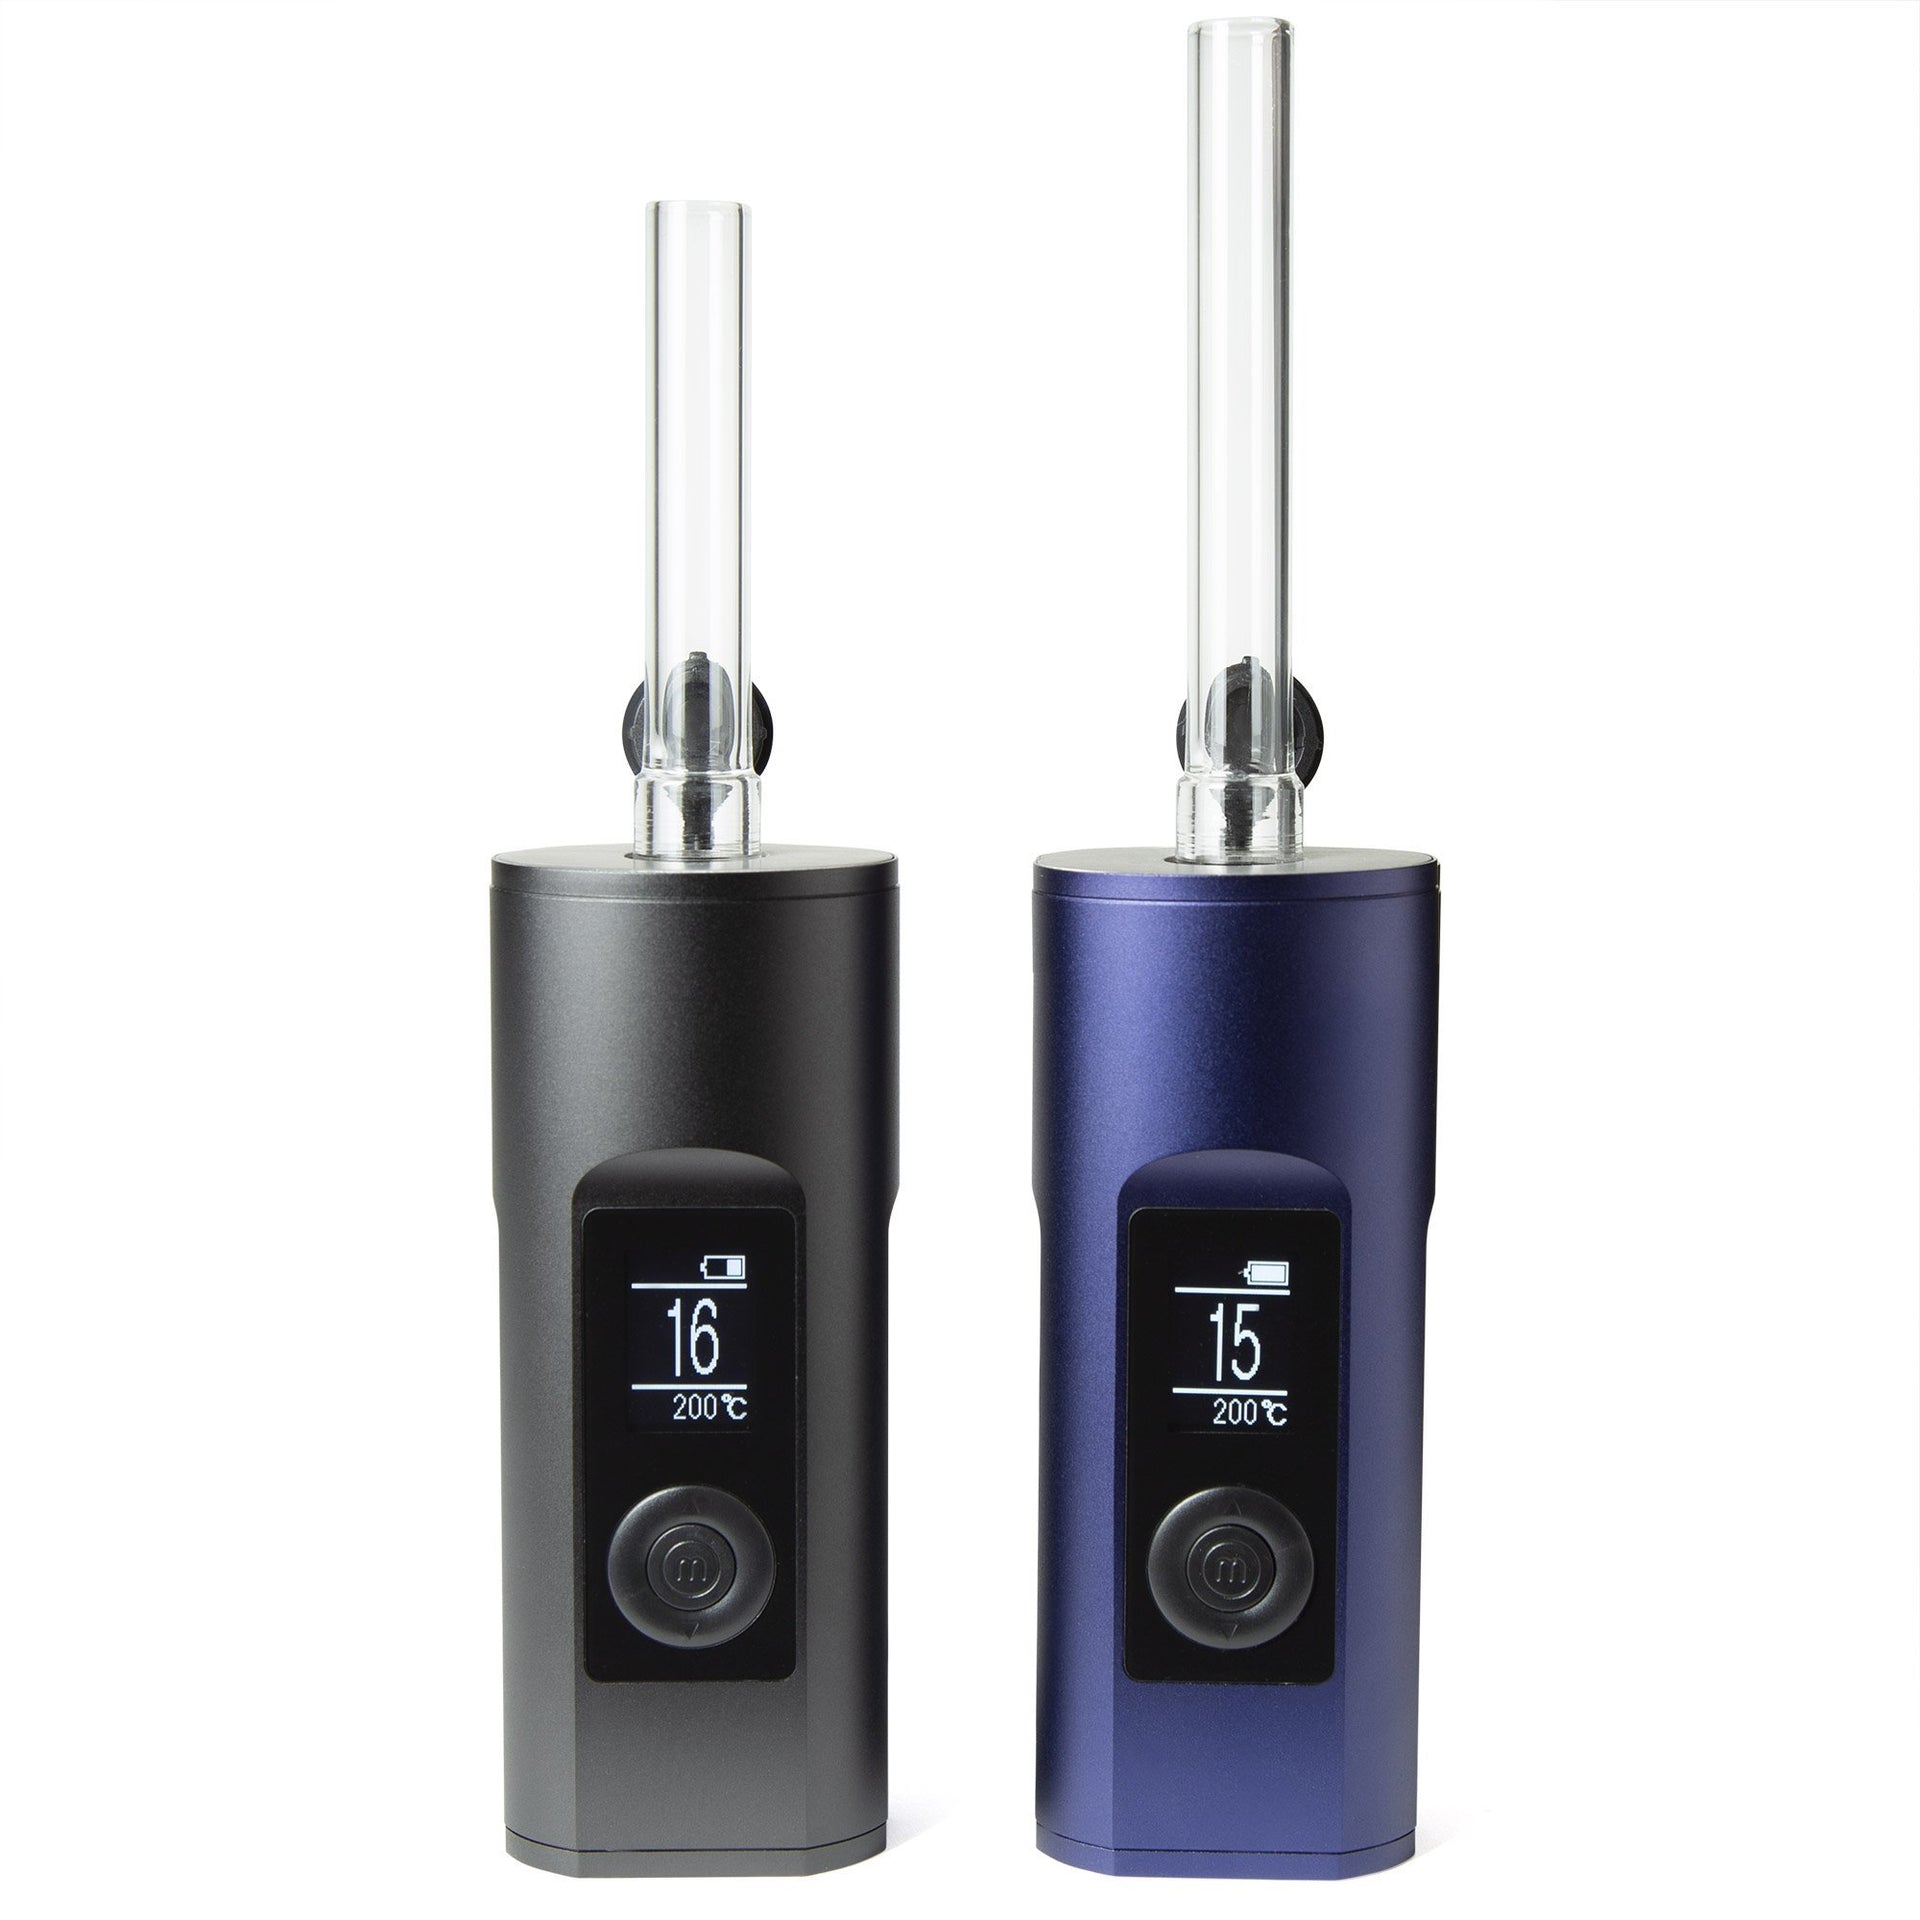 Arizer Air 2 vs Solo 2: Finding the Perfect Arizer Vaporizer